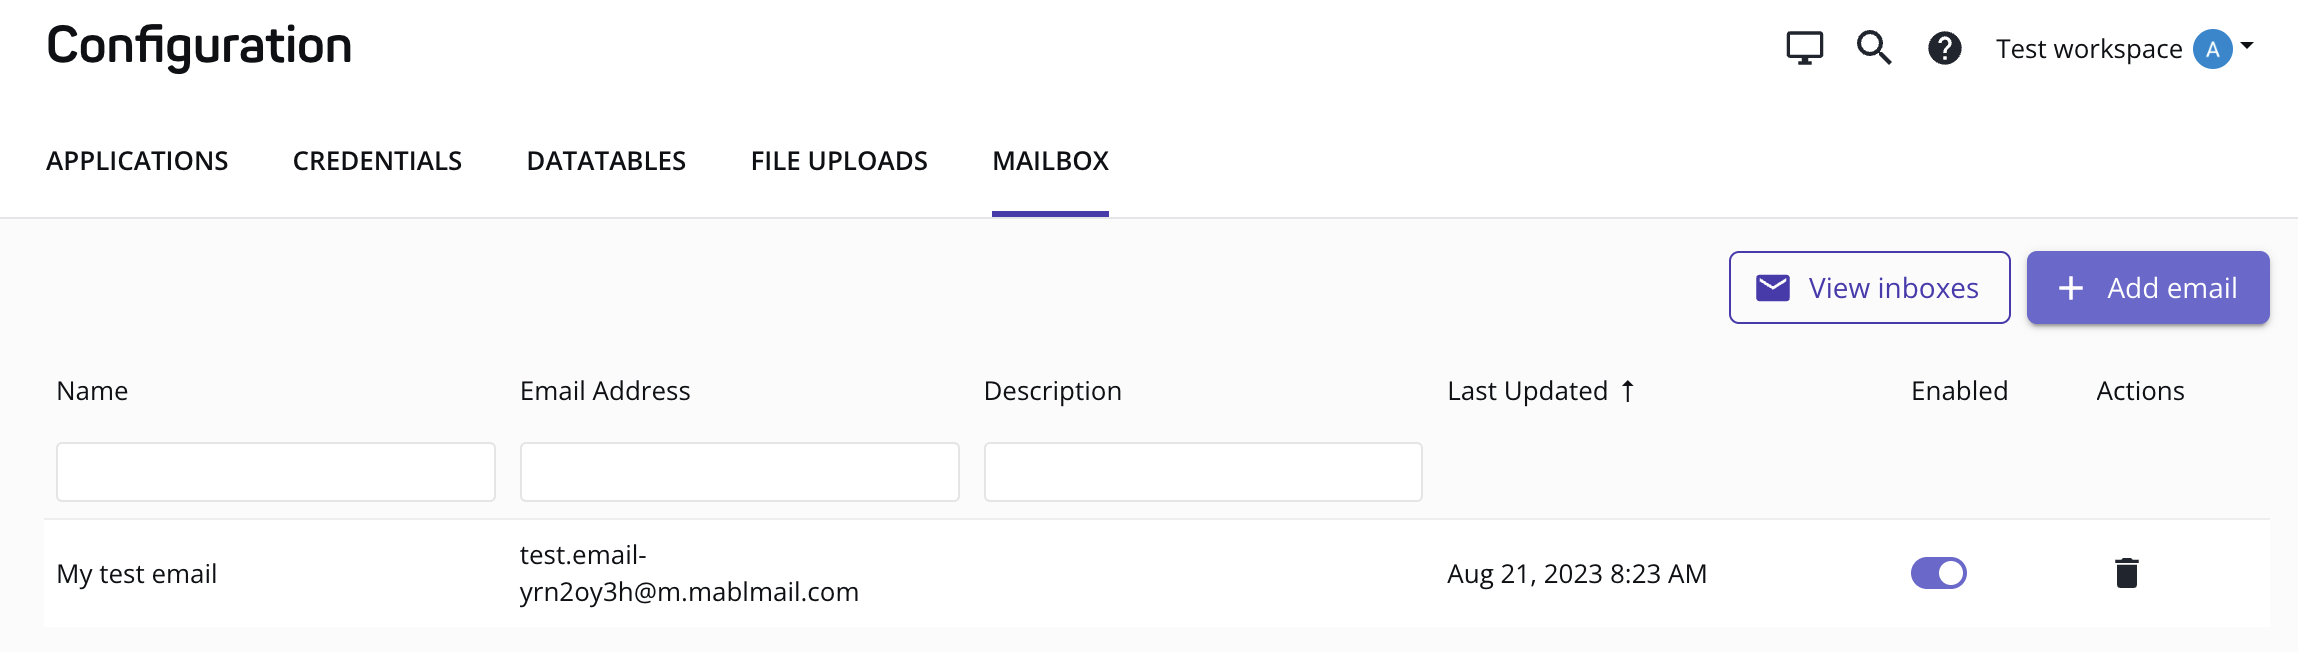 The View Inboxes button from the Configuration page